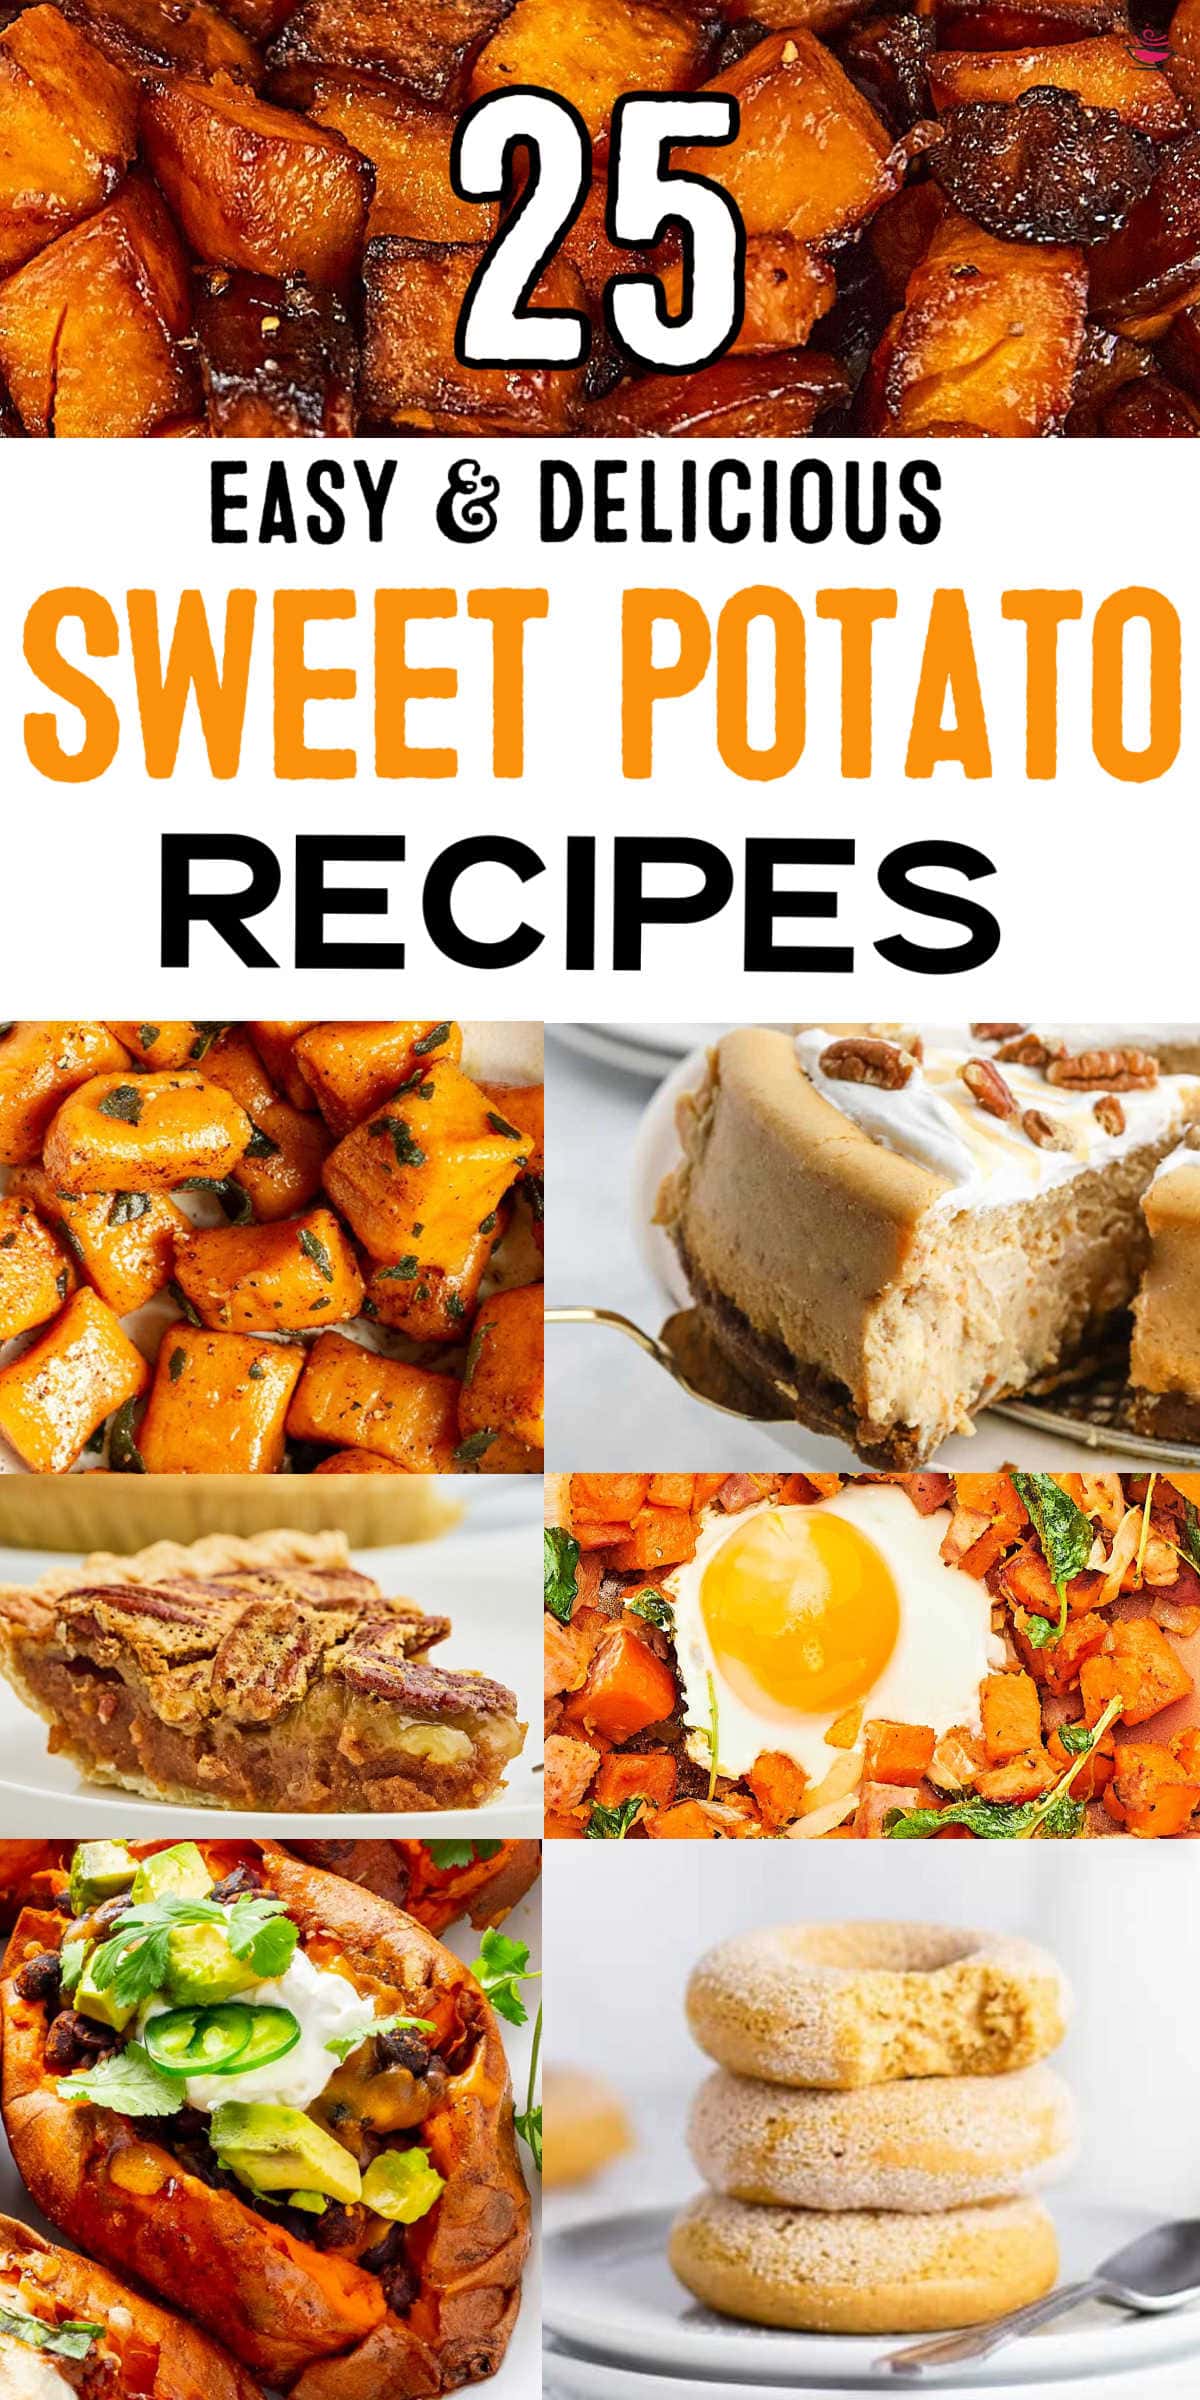 We have collected 25 unique sweet potato recipes perfect for fall! From comforting side dishes and hearty mains to mouth-watering desserts. There's something for everyone. Some recipe are perfect for Thanksgiving, other are great for busy weeknights all year long. #cheerfulcook #sweetpotatorecipes #fallrecipes #comfortfood #thanksgiving ♡ cheerfulcook.com via @cheerfulcook